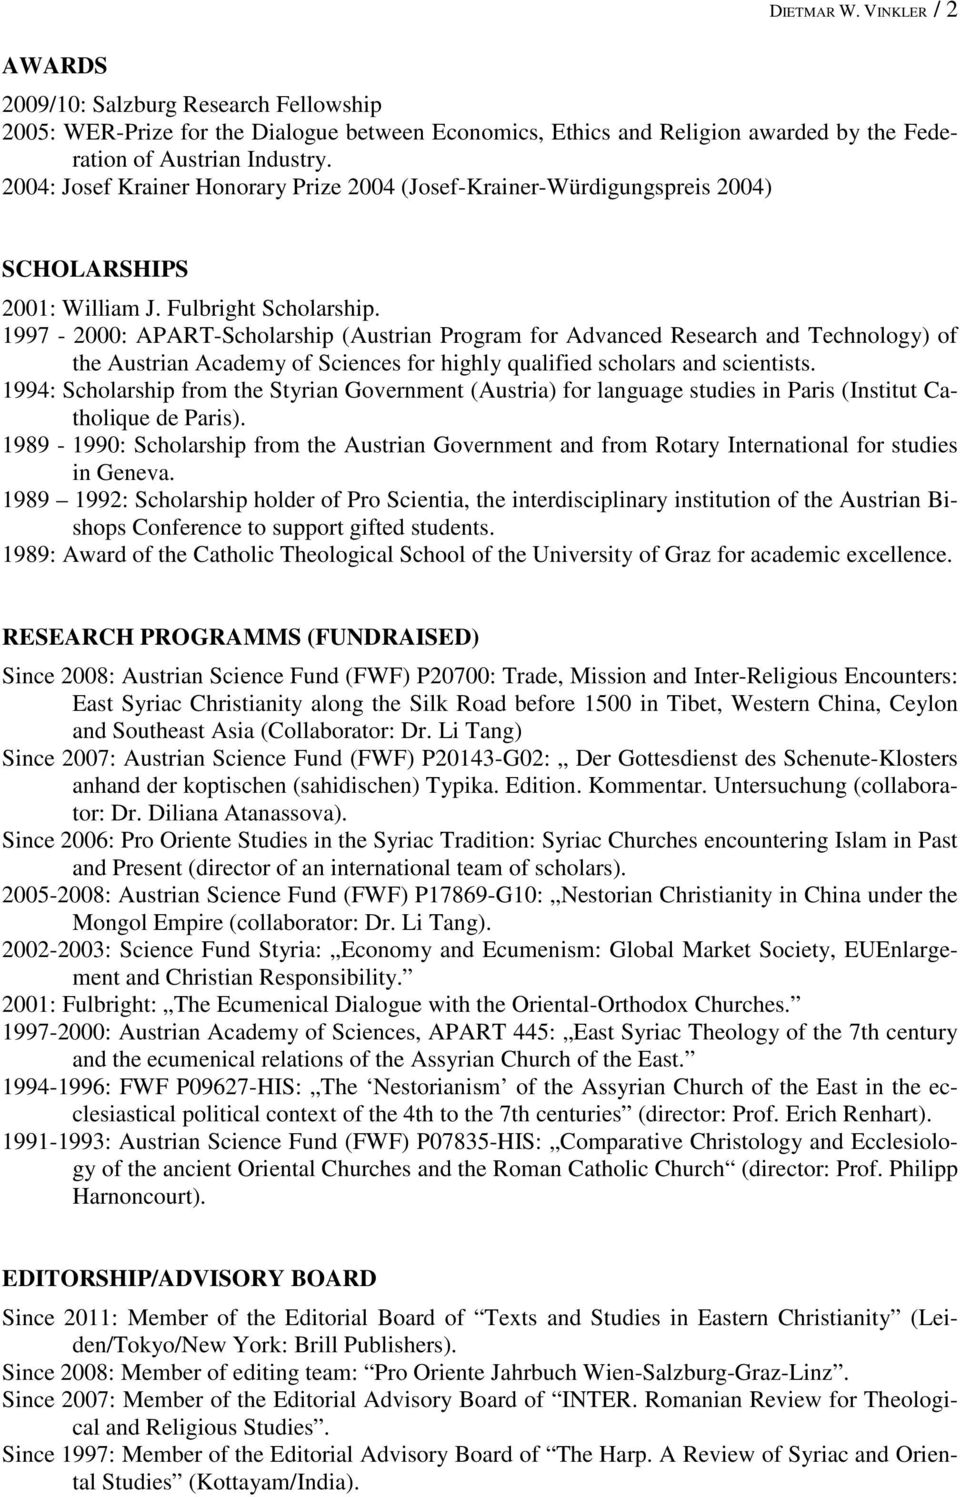 1997-2000: APART-Scholarship (Austrian Program for Advanced Research and Technology) of the Austrian Academy of Sciences for highly qualified scholars and scientists.